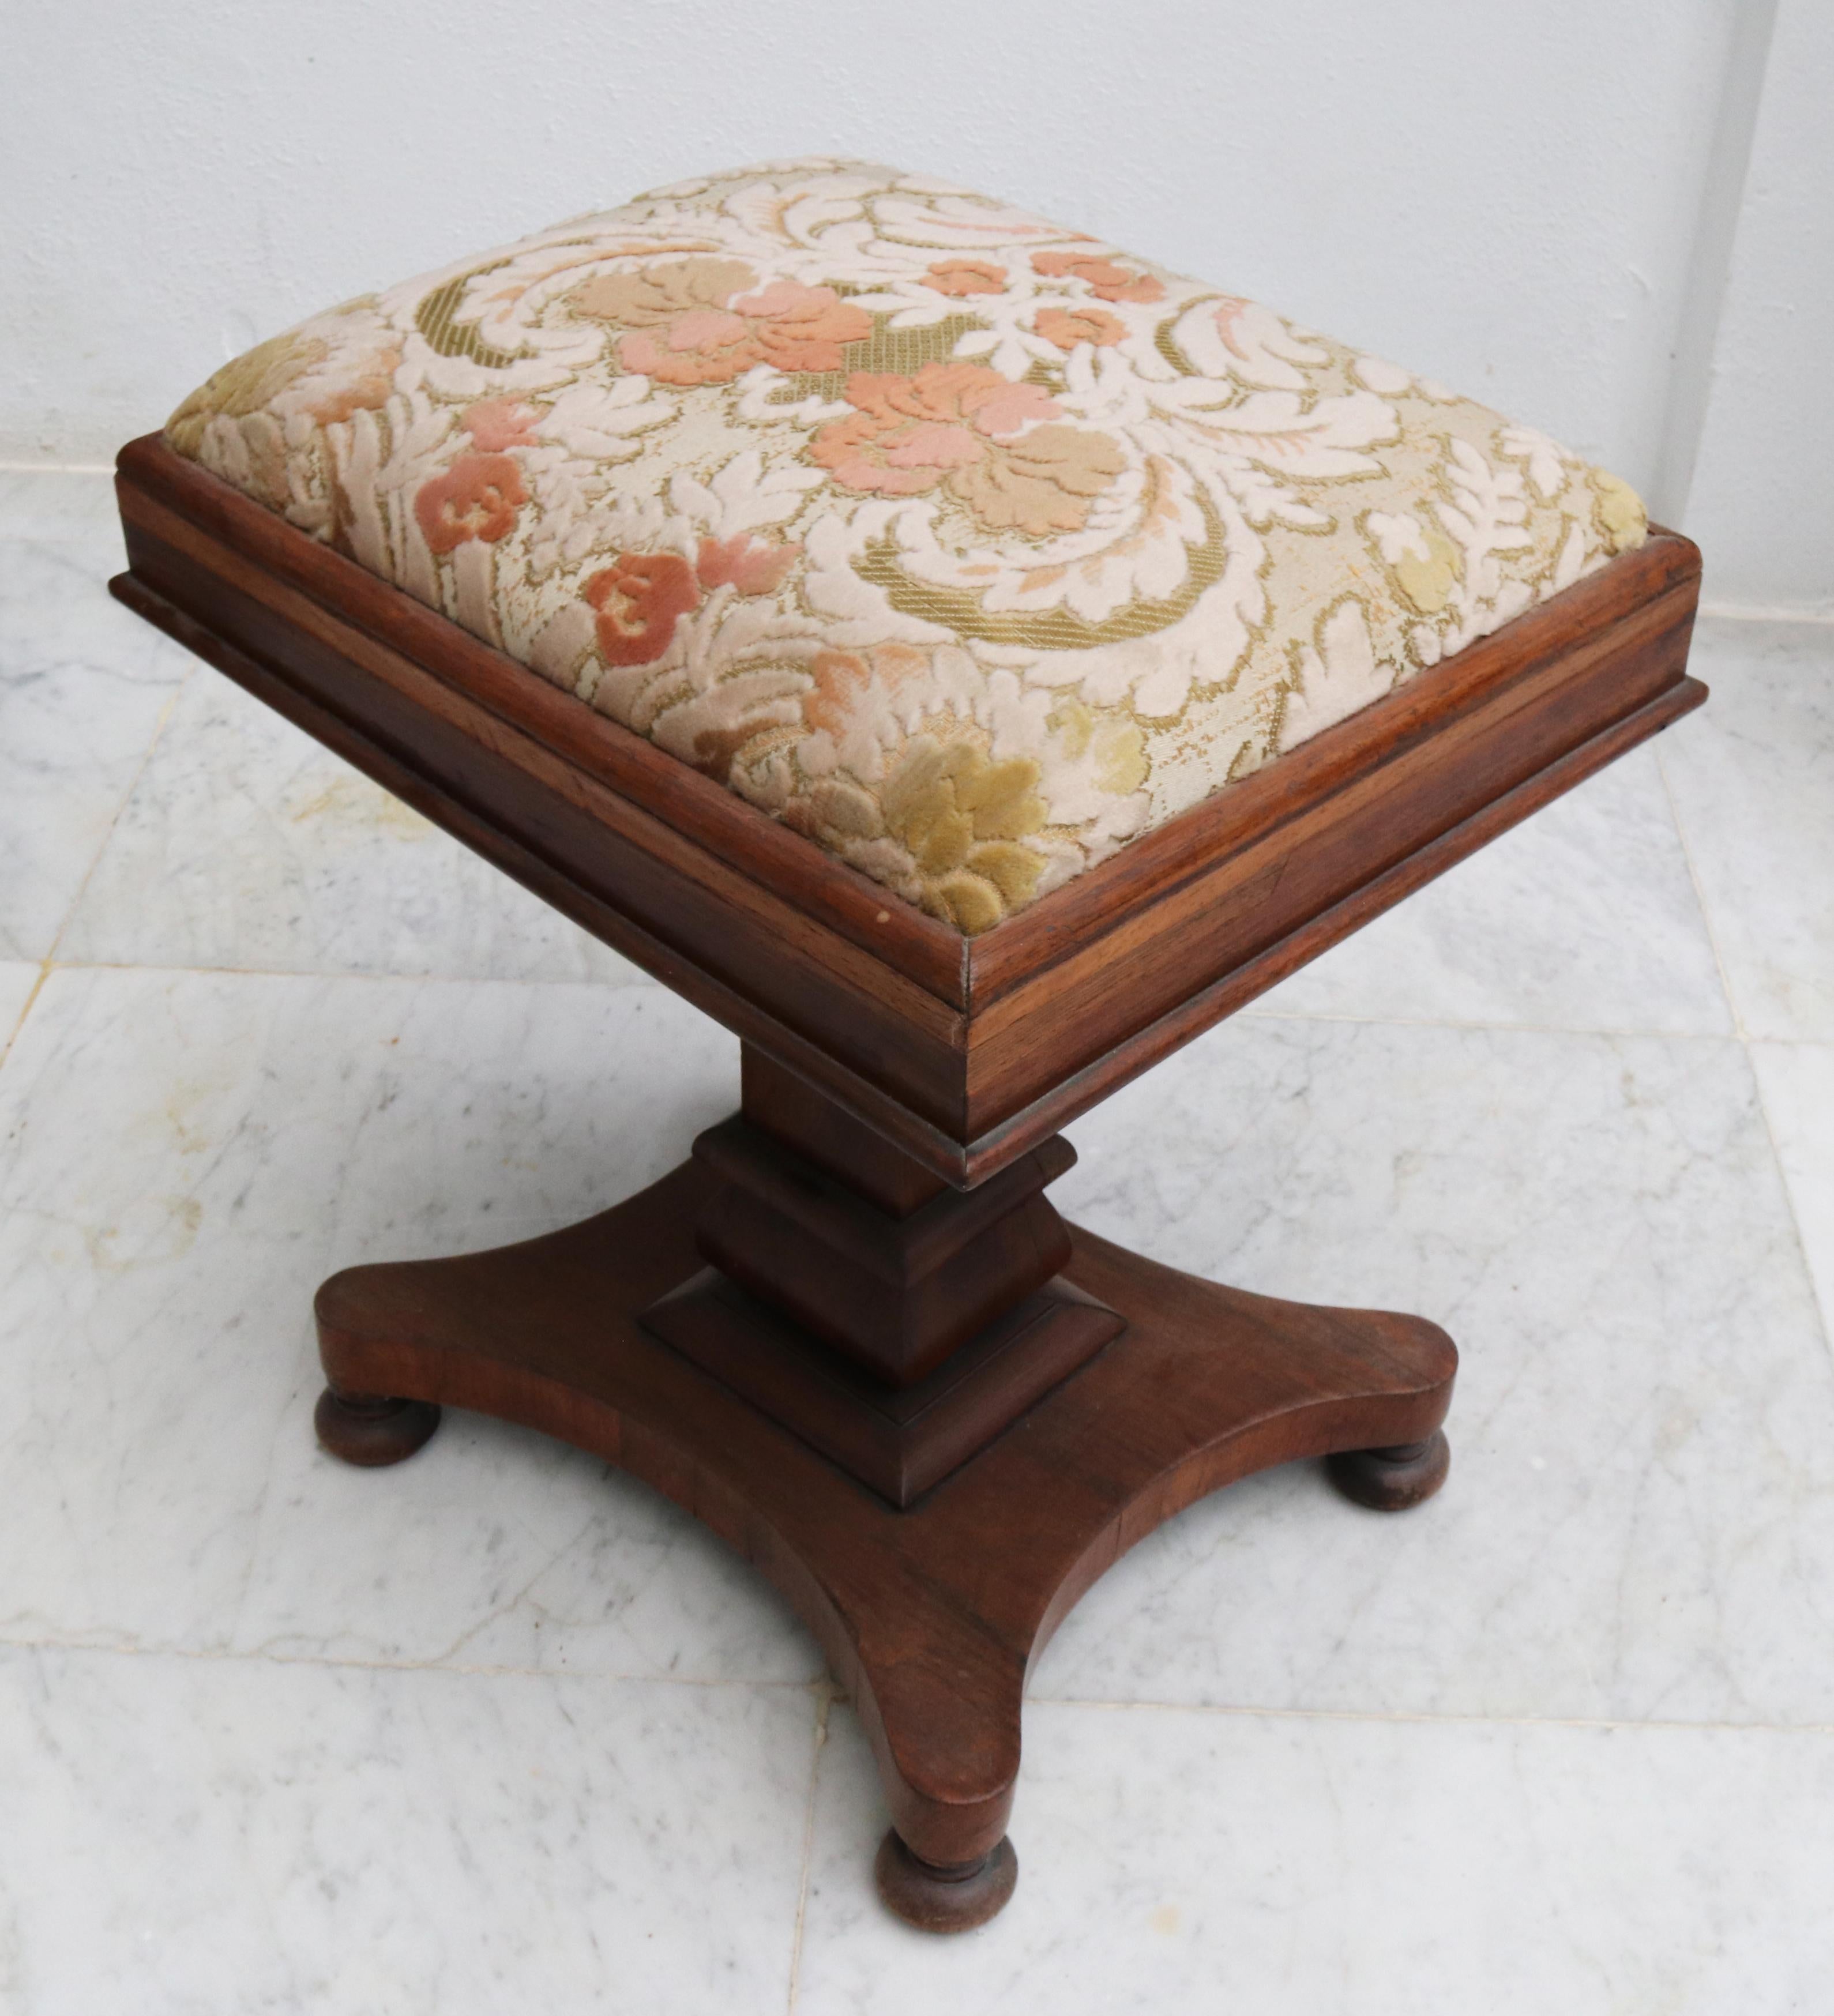 19th Century English Mahogany Pedestal Side Table with Flower Pattern Velvet Top For Sale 1